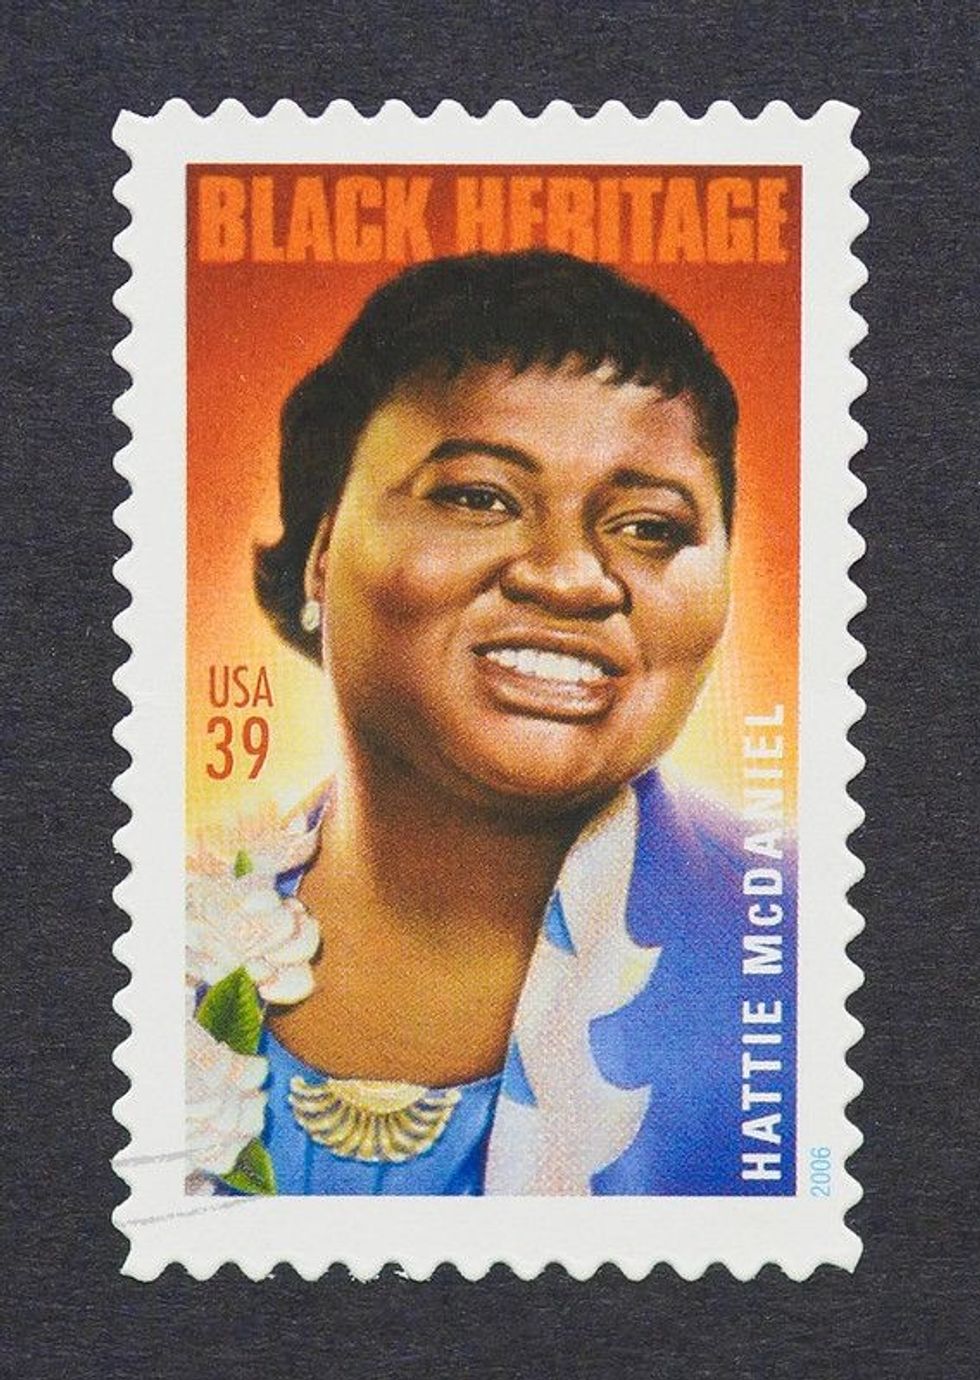 Did you know these Hattie McDaniel quotes before?